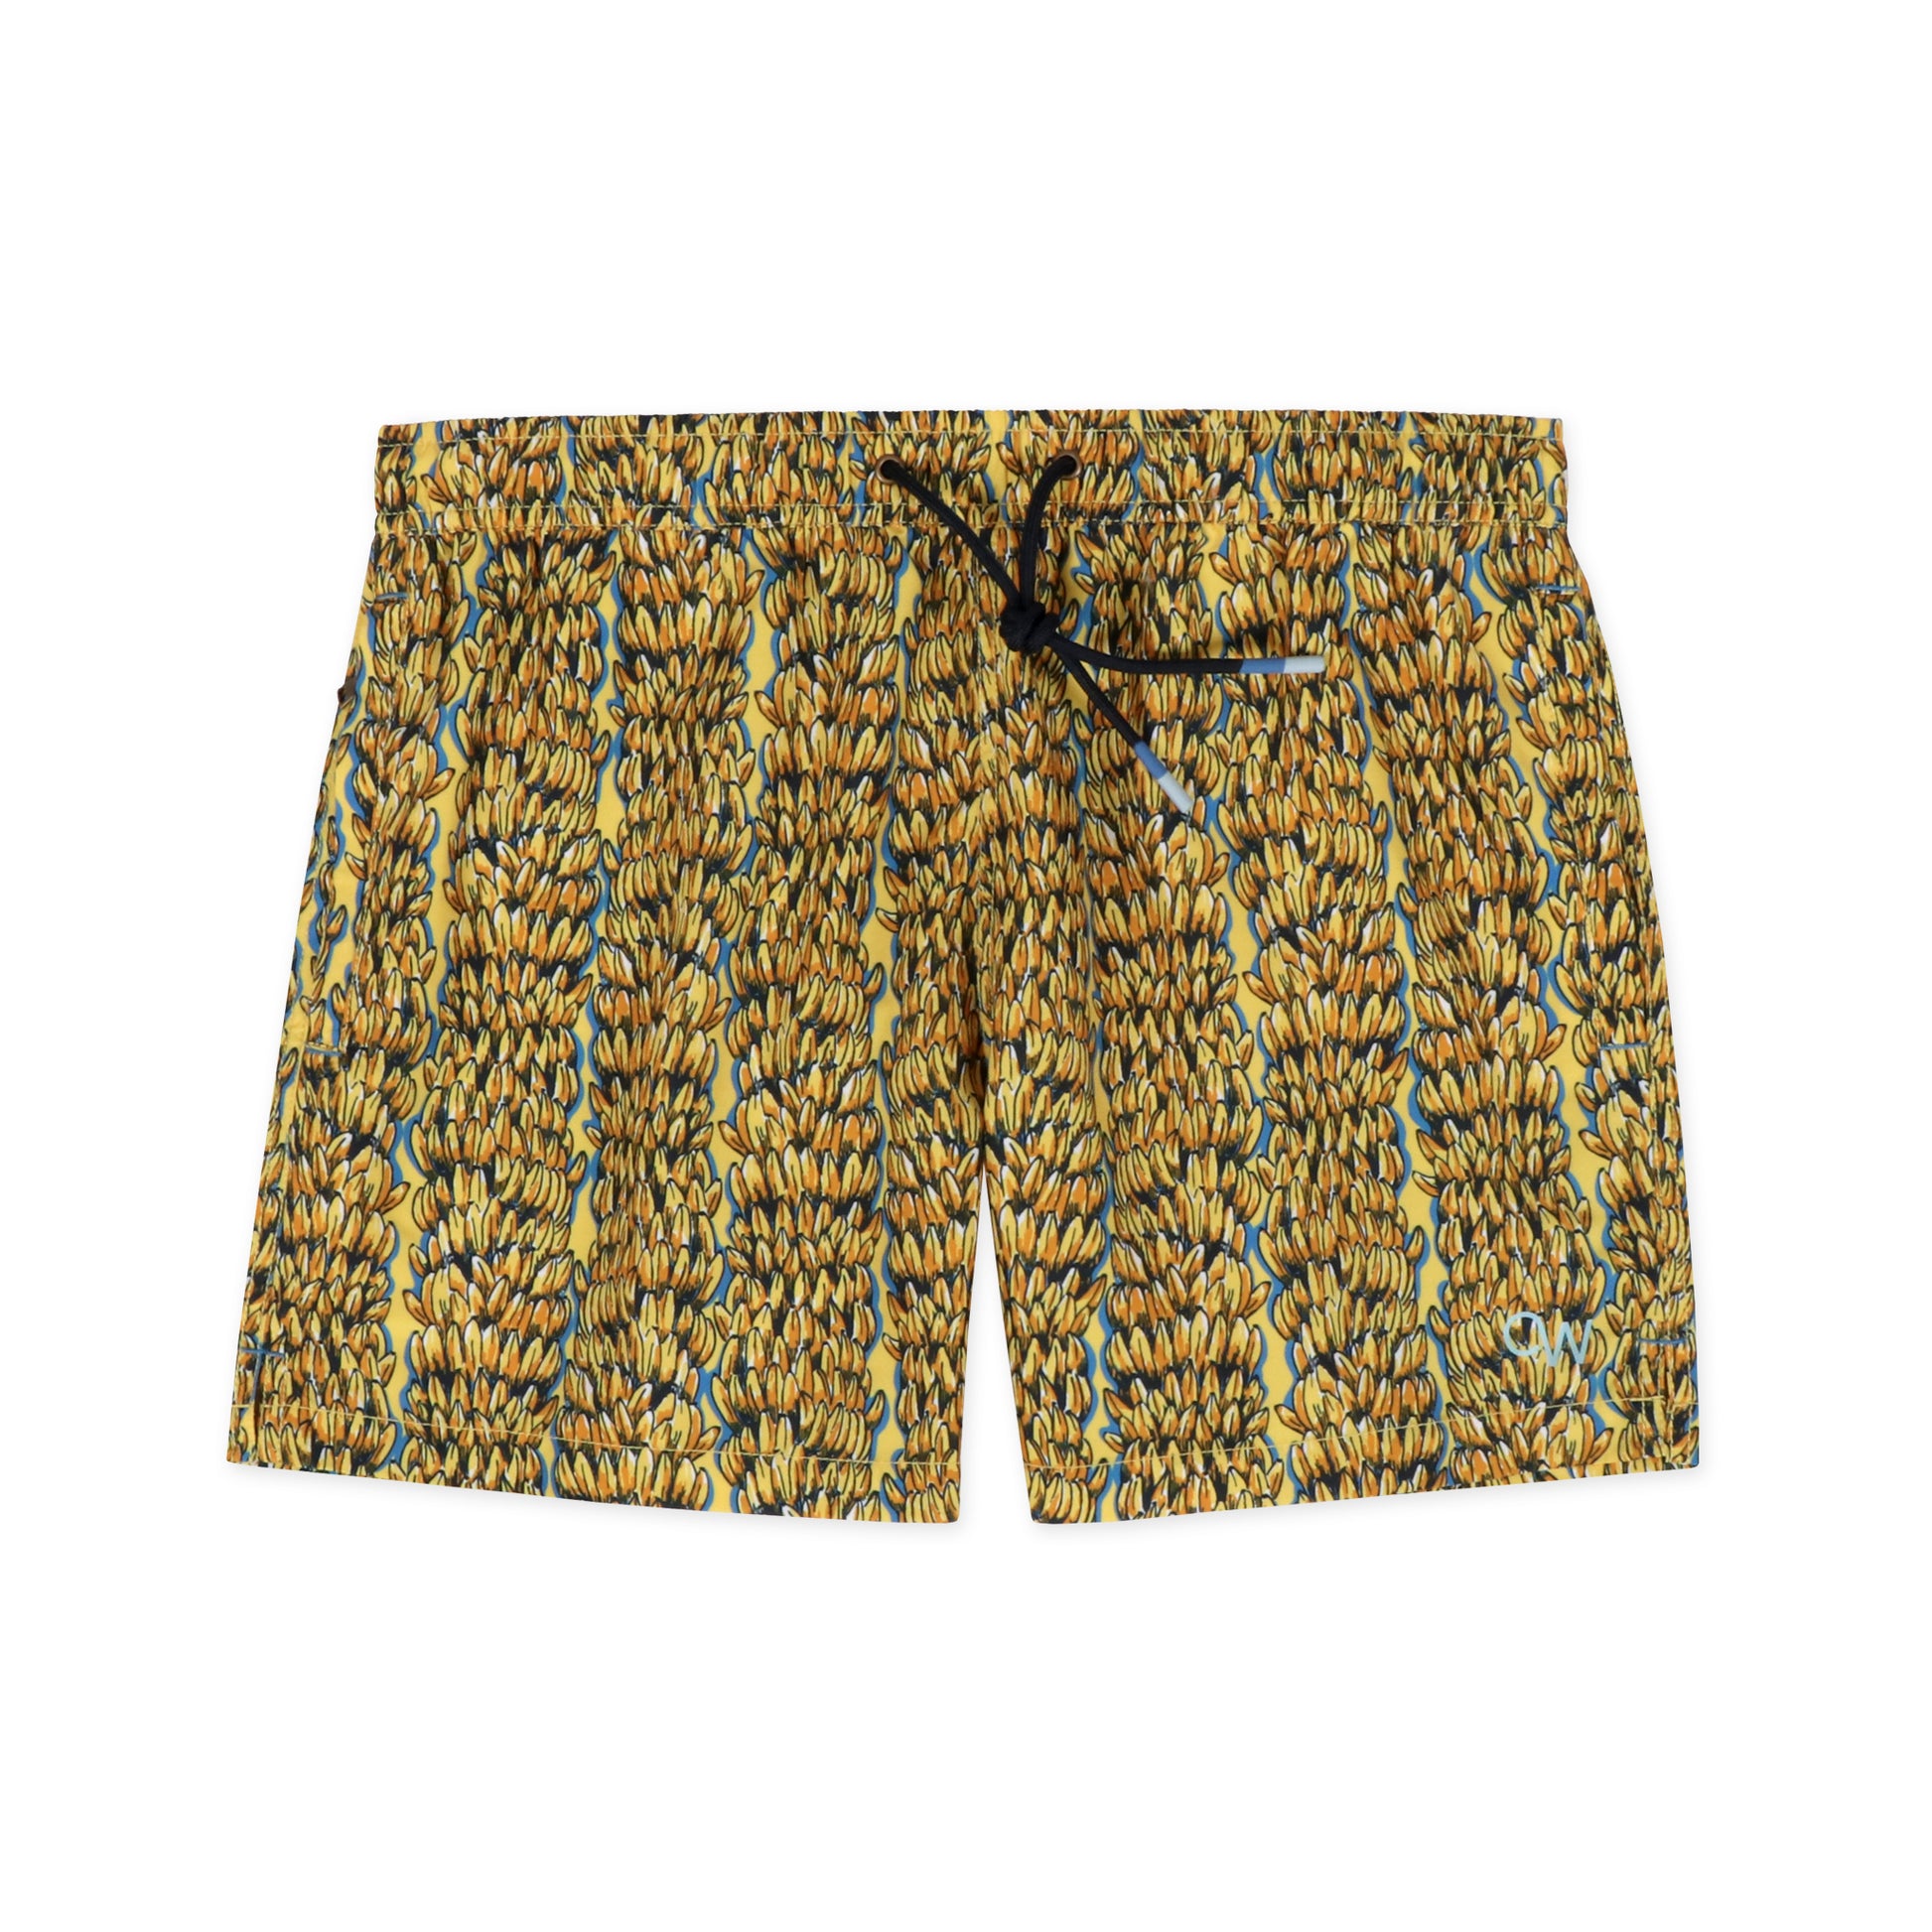 OWSS2207 GOING BANANAS PRINT SWIM SHORT RECYCLED POLYESTER